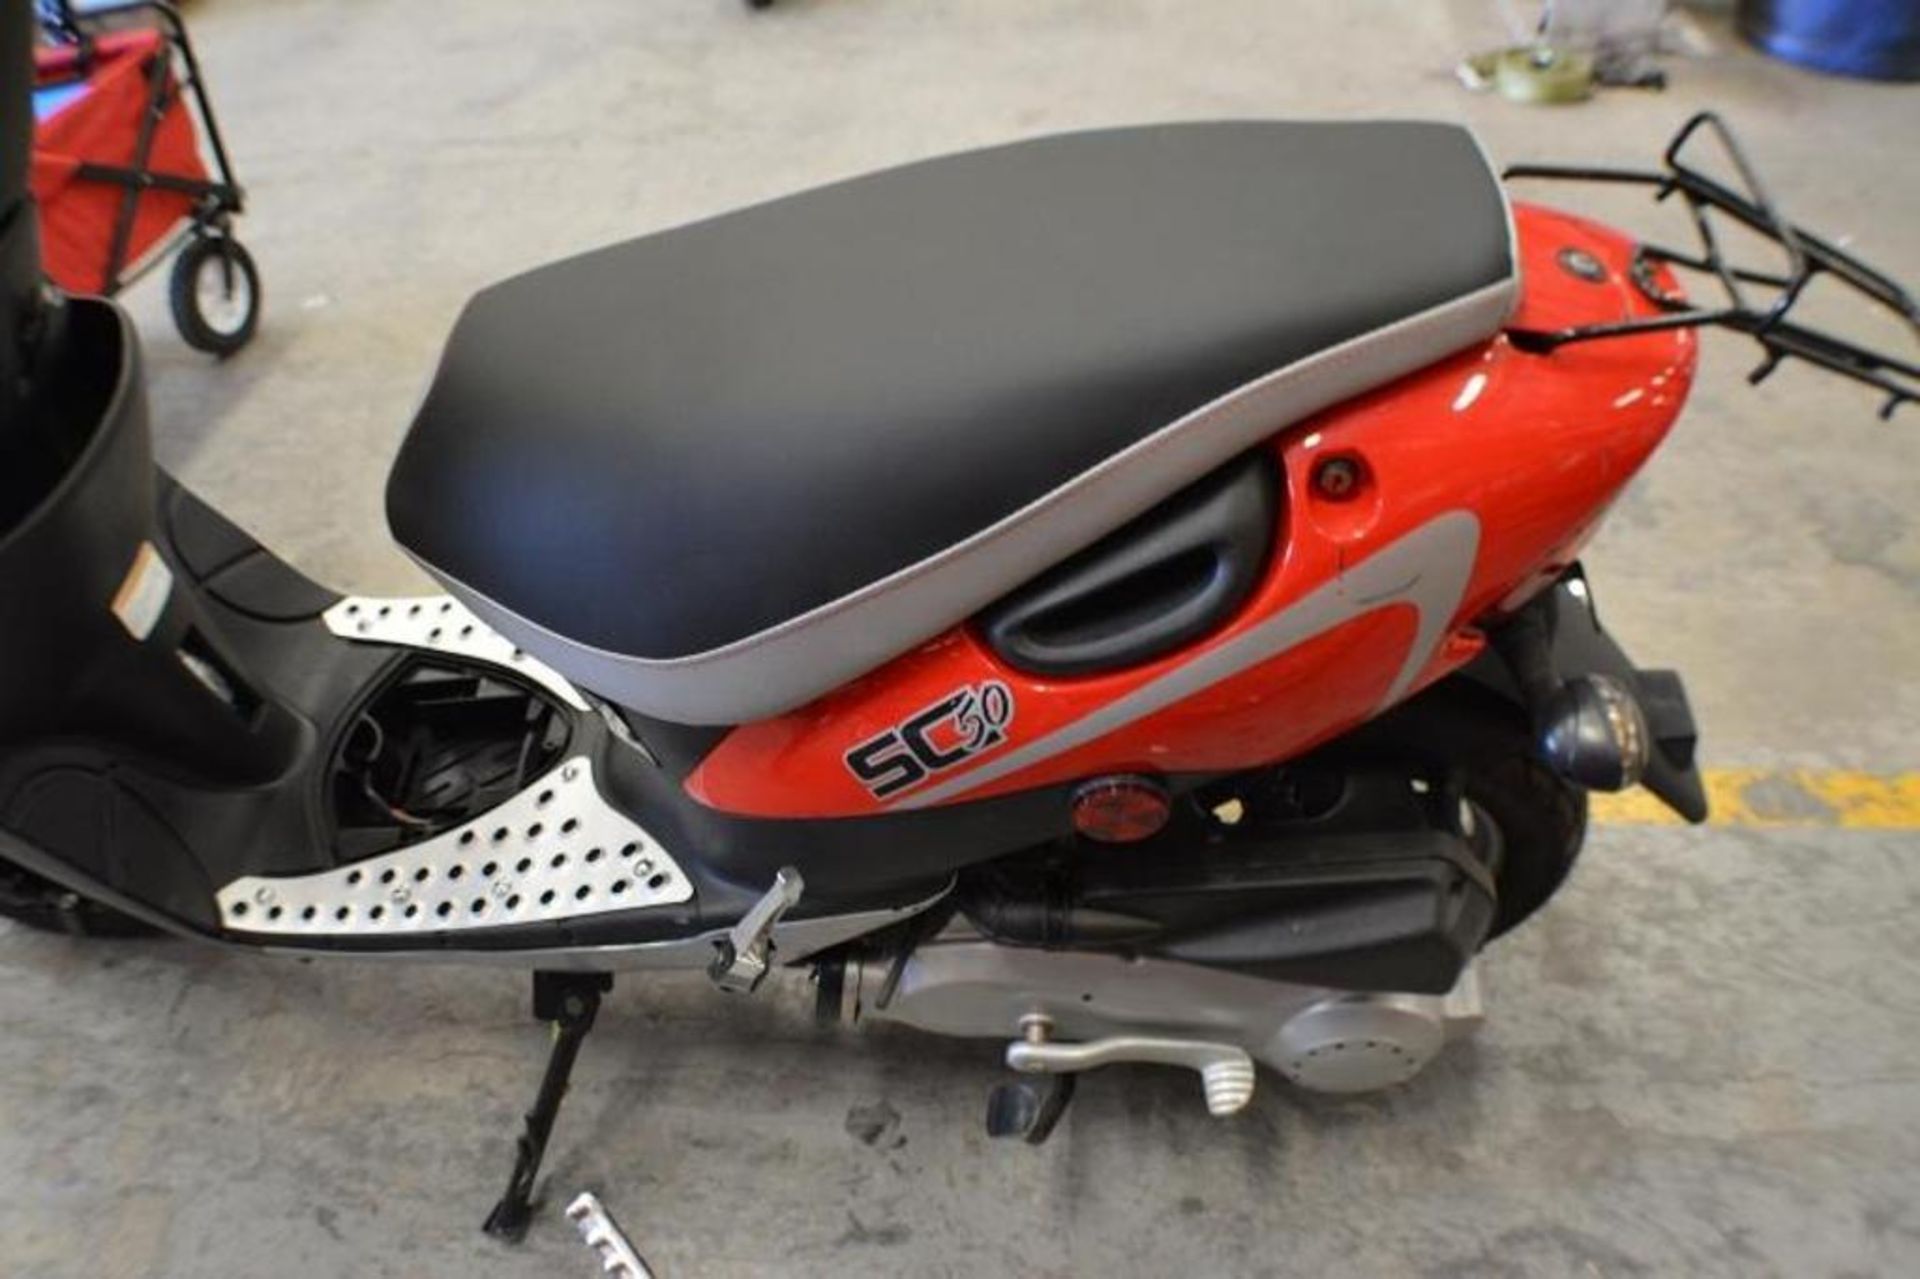 Electric Scooter 50cc Red/Black Color. This unit is for EXPORT ONLY. Buyers acknowledges is for expo - Image 6 of 8